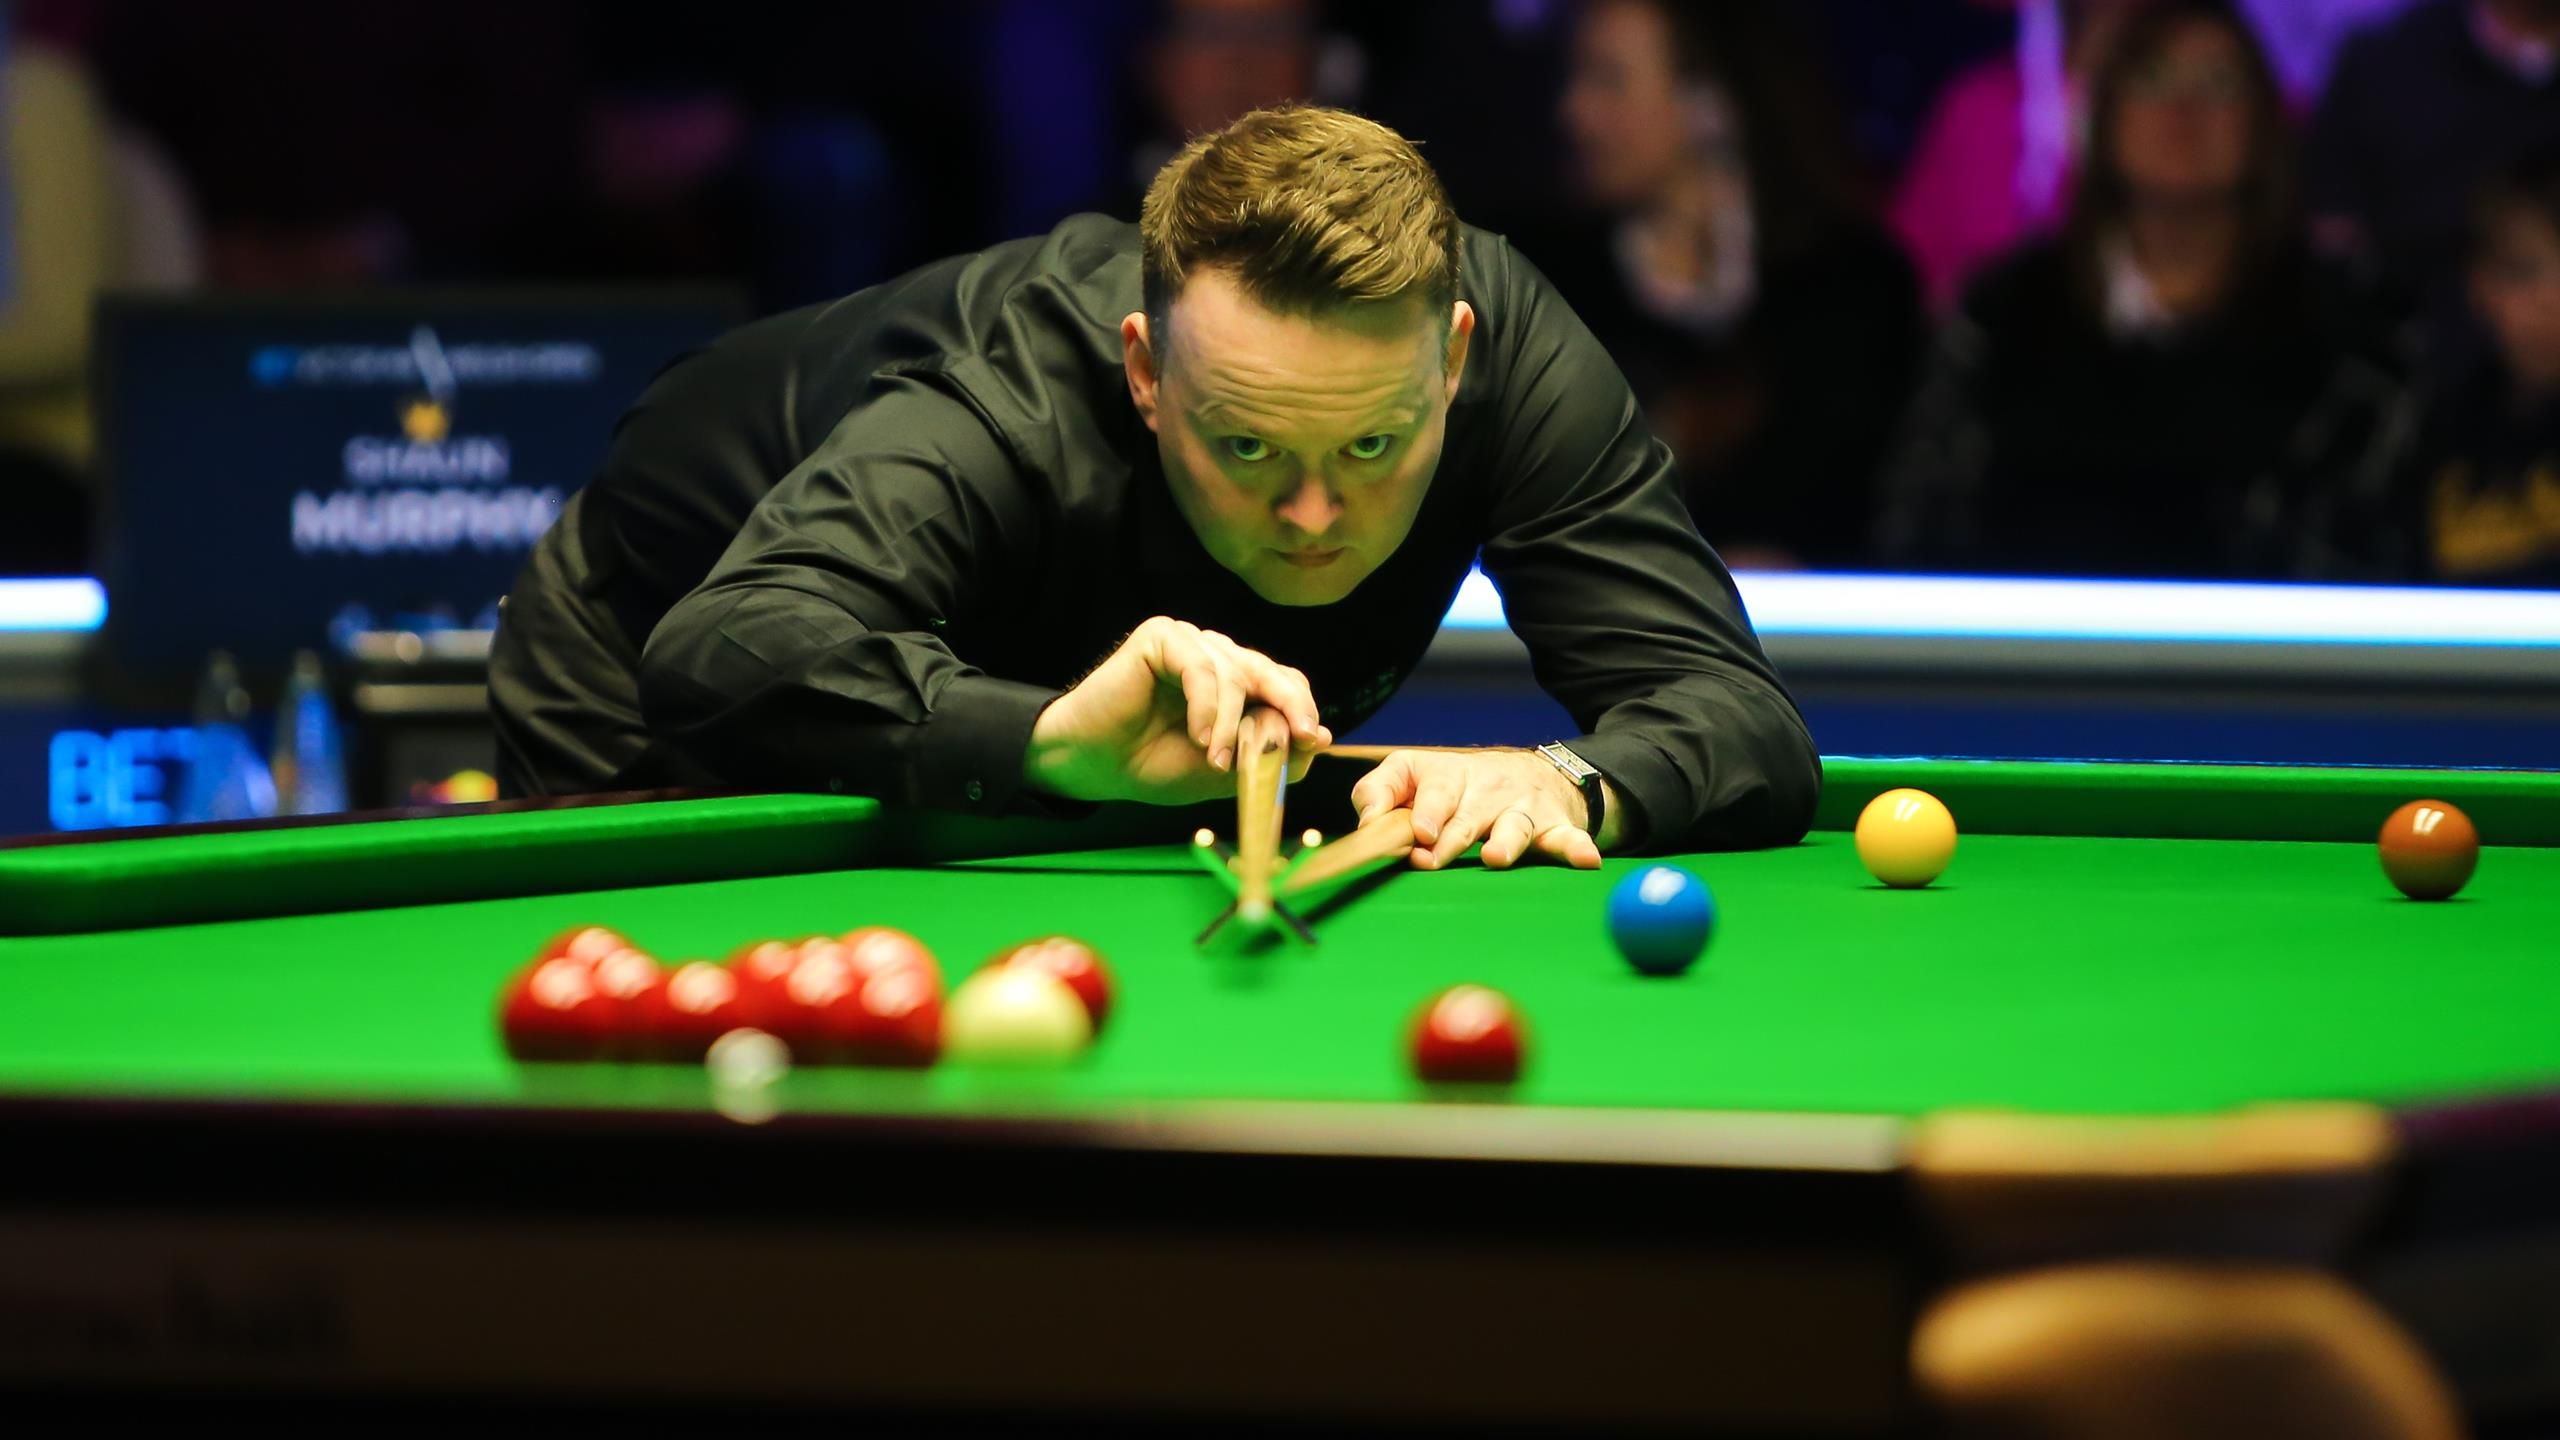 Players Championship 2023 final as it happened - Shaun Murphy seals title with emphatic win against Ali Carter